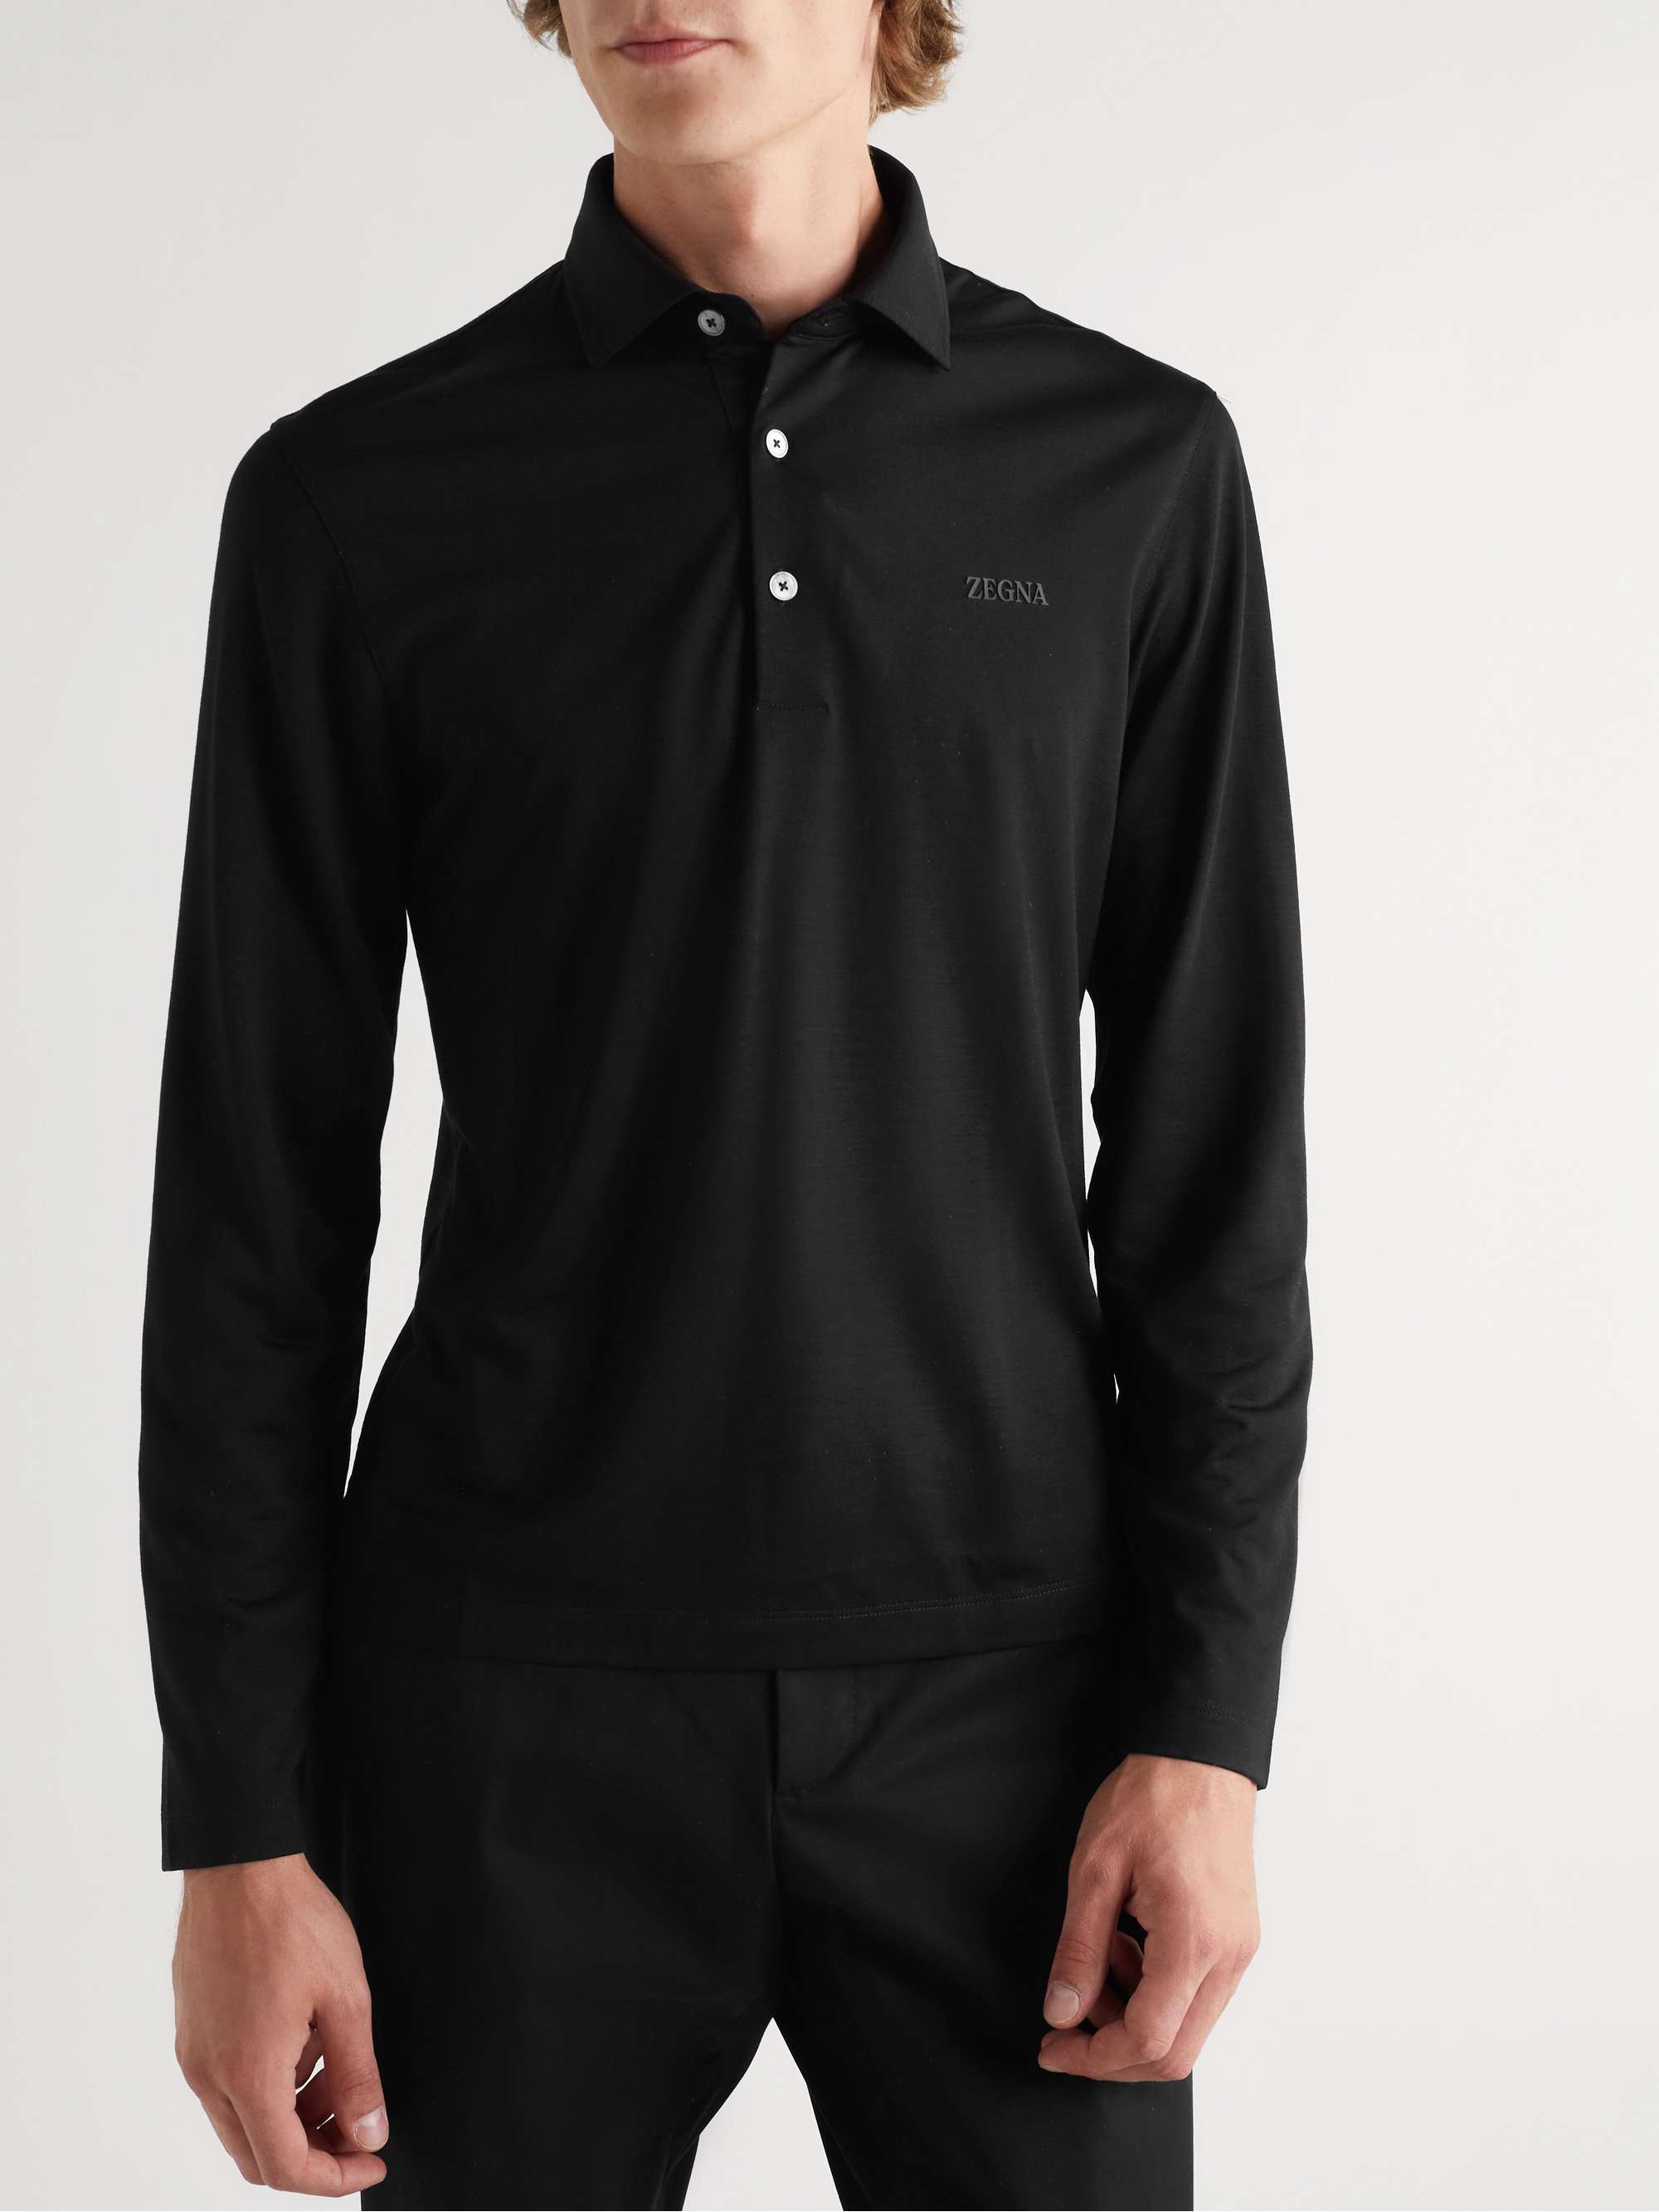 ZEGNA Slim-Fit TECHMERINO Wool and Lyocell-Blend Jersey Polo Shirt